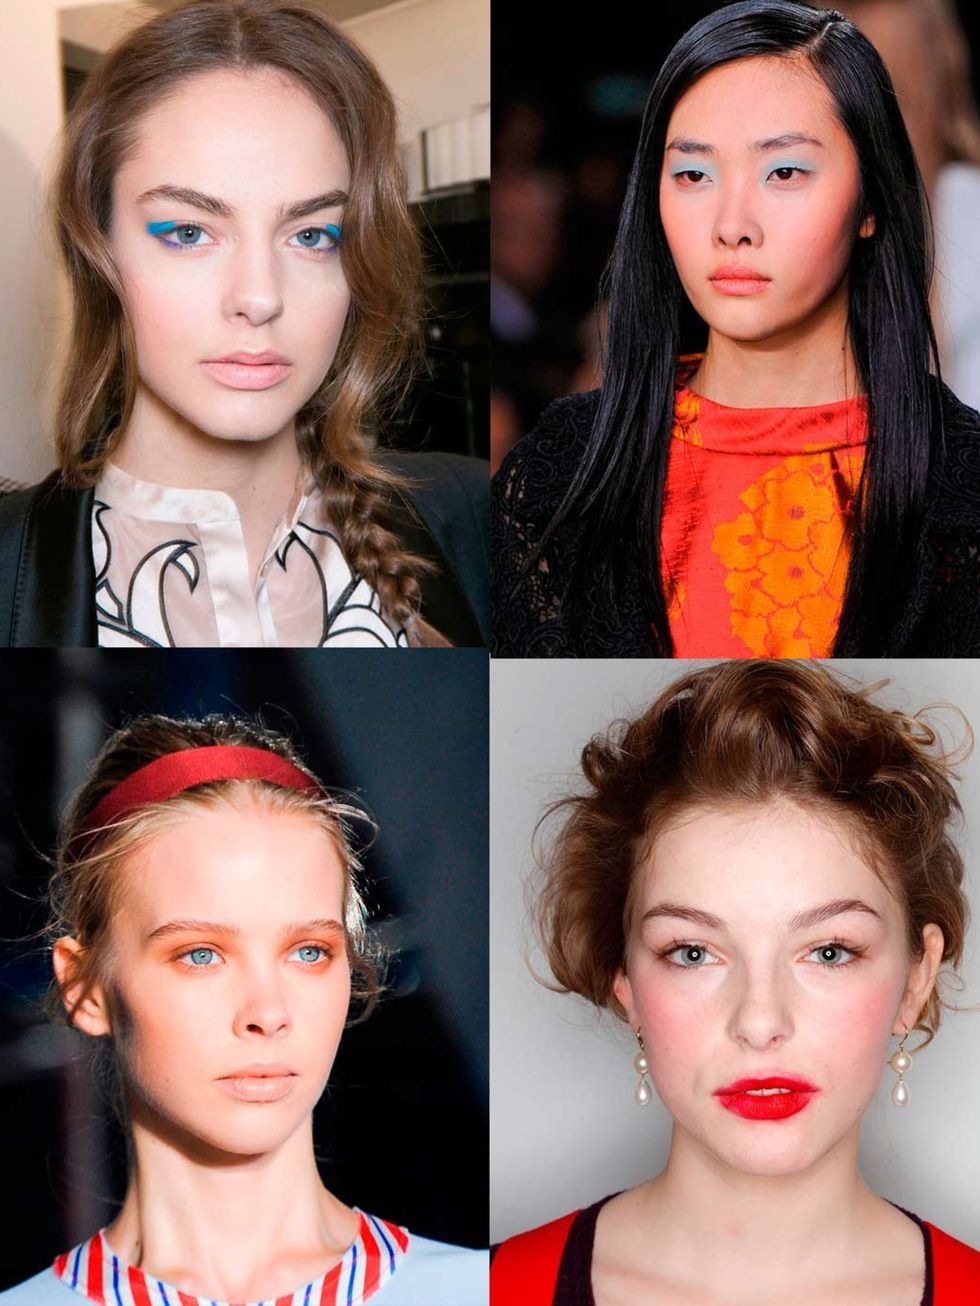 <p>London Fashion Week AW14 was a riot of colour and imagination. Here we show you how to get ahead and recreate the looks now. Which will you try first?</p><p><a href="http://www.elleuk.com/beauty/hair/hair-features/best-hair-london-fashion-week"></a></p